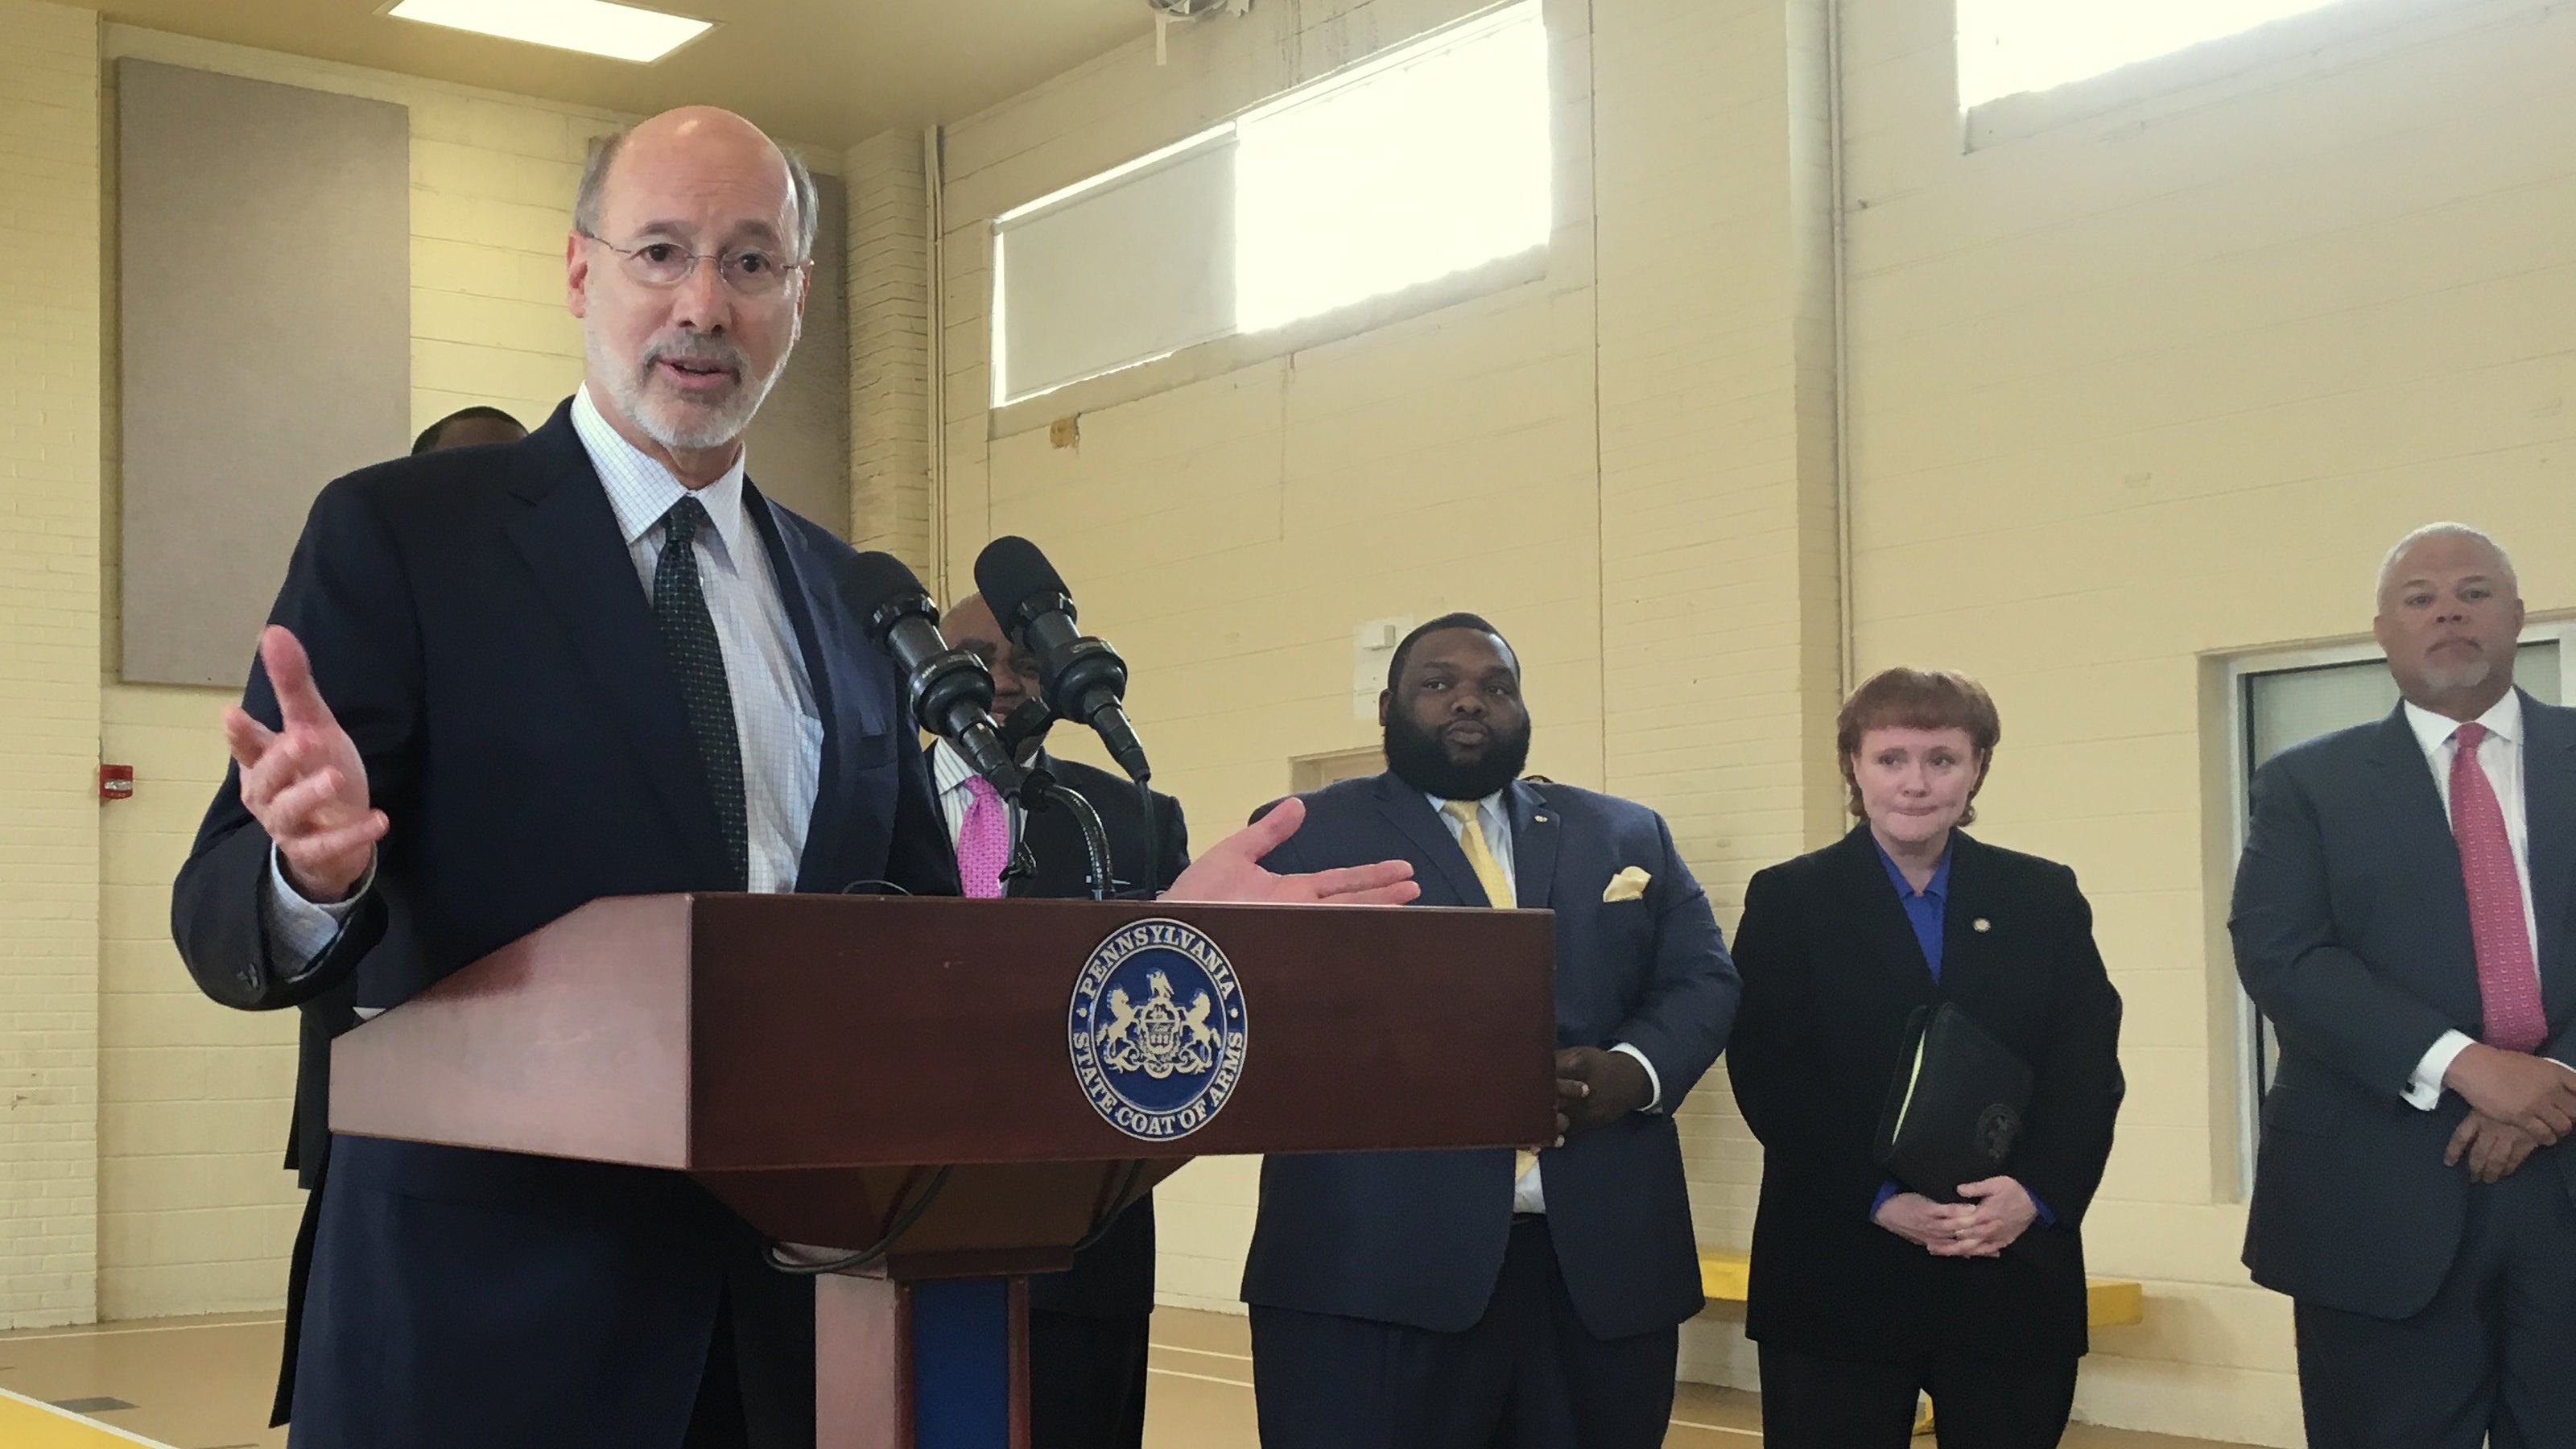  Pennsylvania Gov. Tom Wolf and local officials discuss funding for senior services at the Wilson Park Senior Center in South Philadelphia. (Dave Davies/WHYY) 